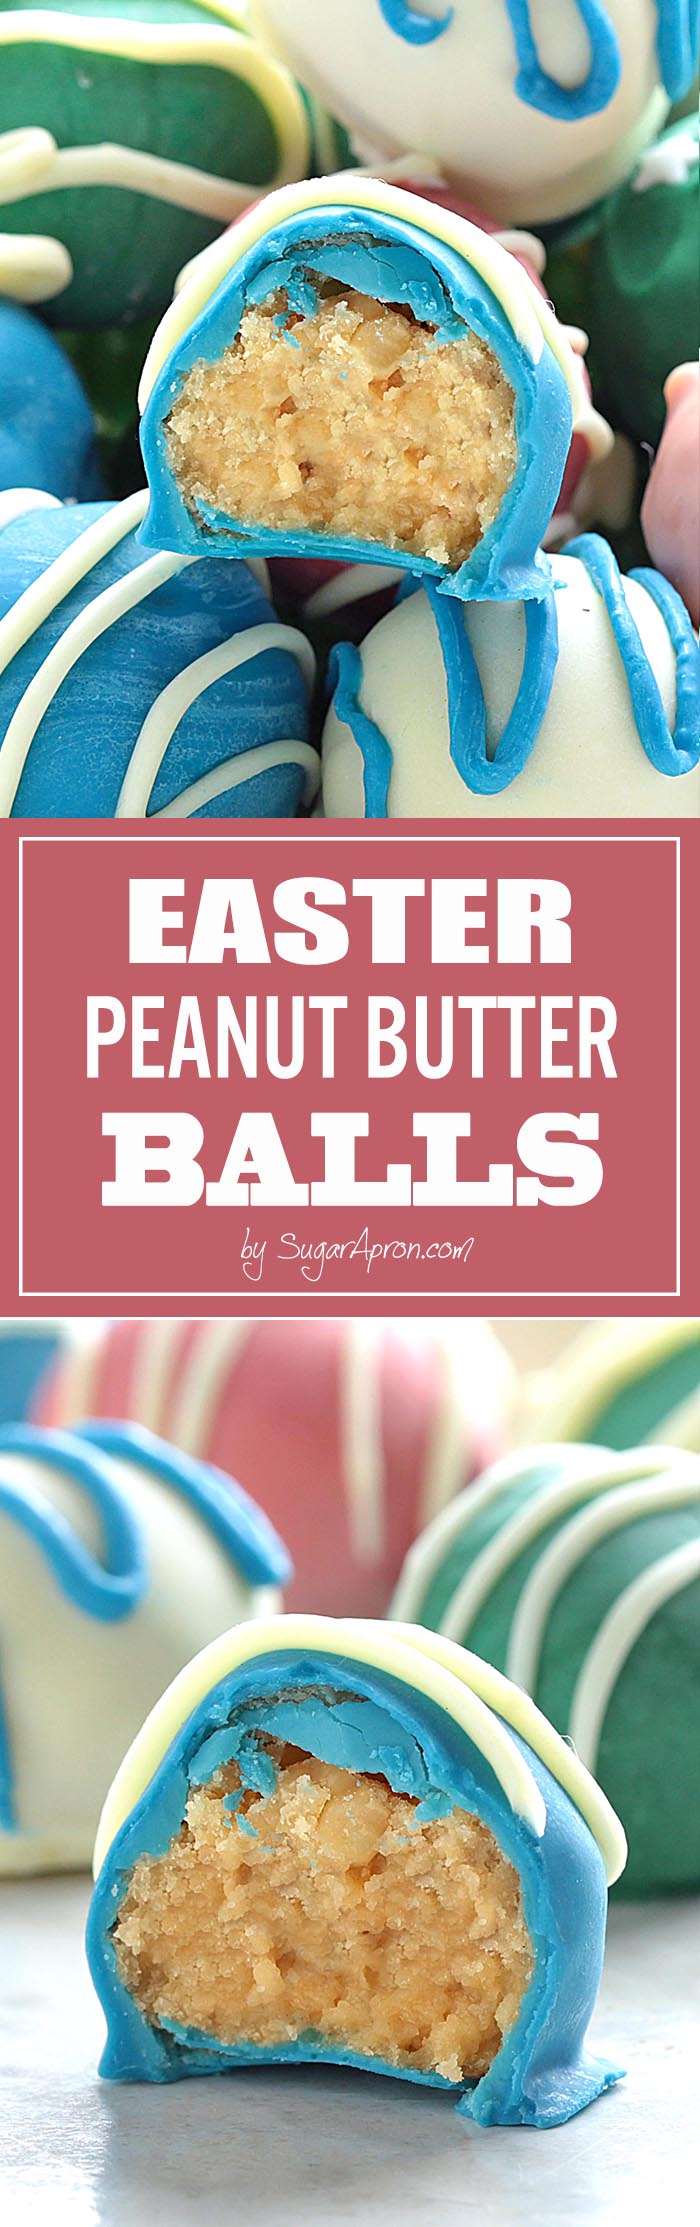  Ridiculously delicious and embarrassingly easy to make Peanut Butter Balls now in a new, special Easter Edition – Oh, and they’re super addicting.....like chips....I bet, you can’t eat just one.